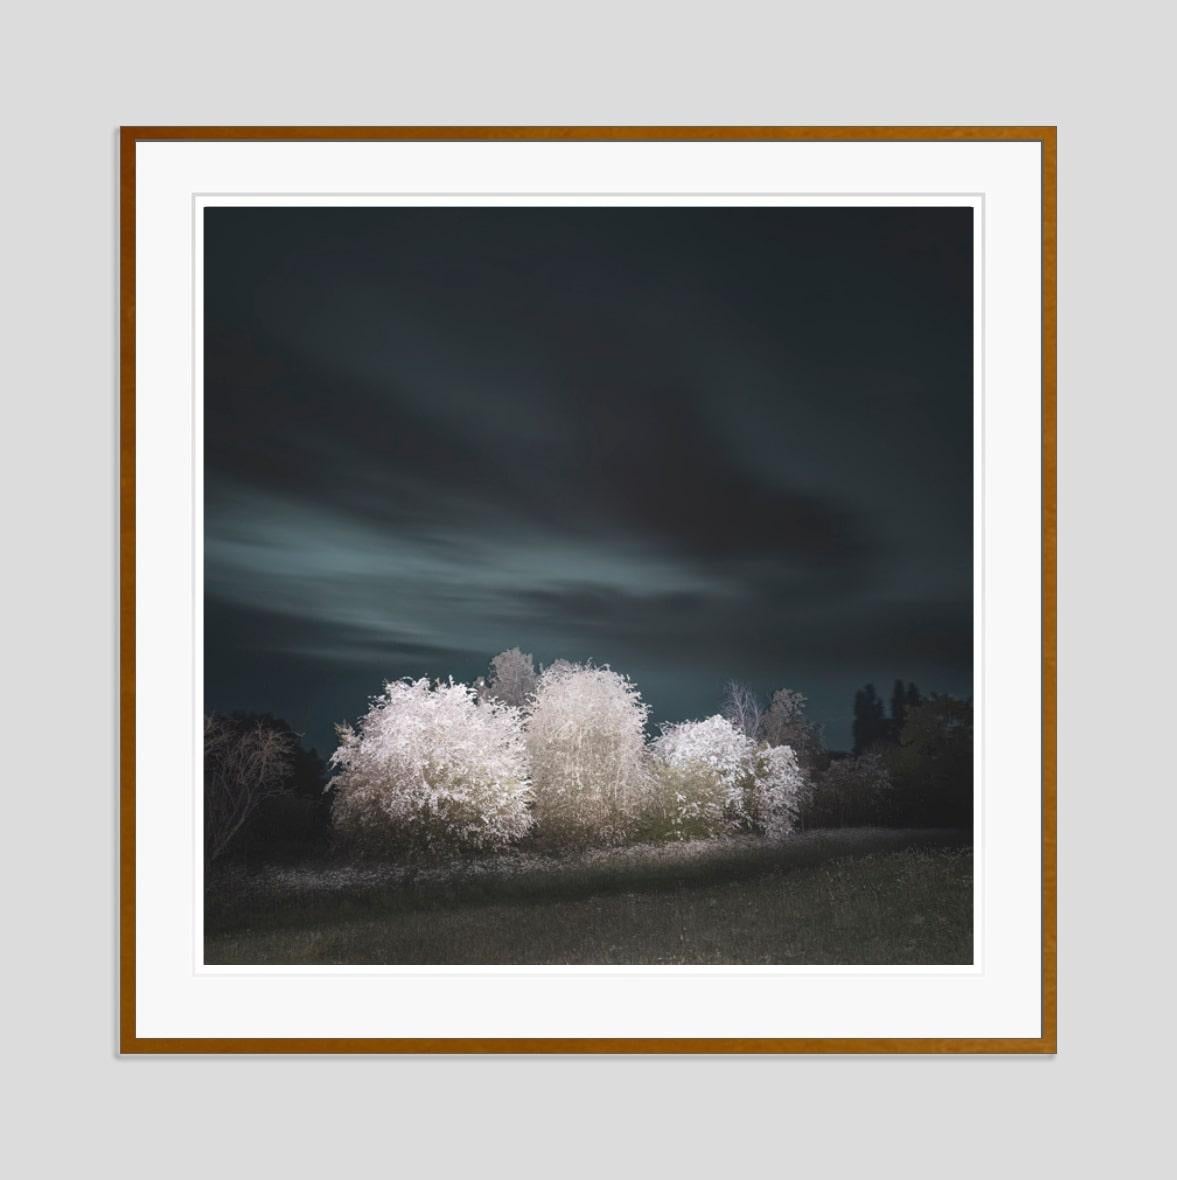 Hawthorn

By Justin Pumfrey

Archival pigment print

Paper size: 20 x 16